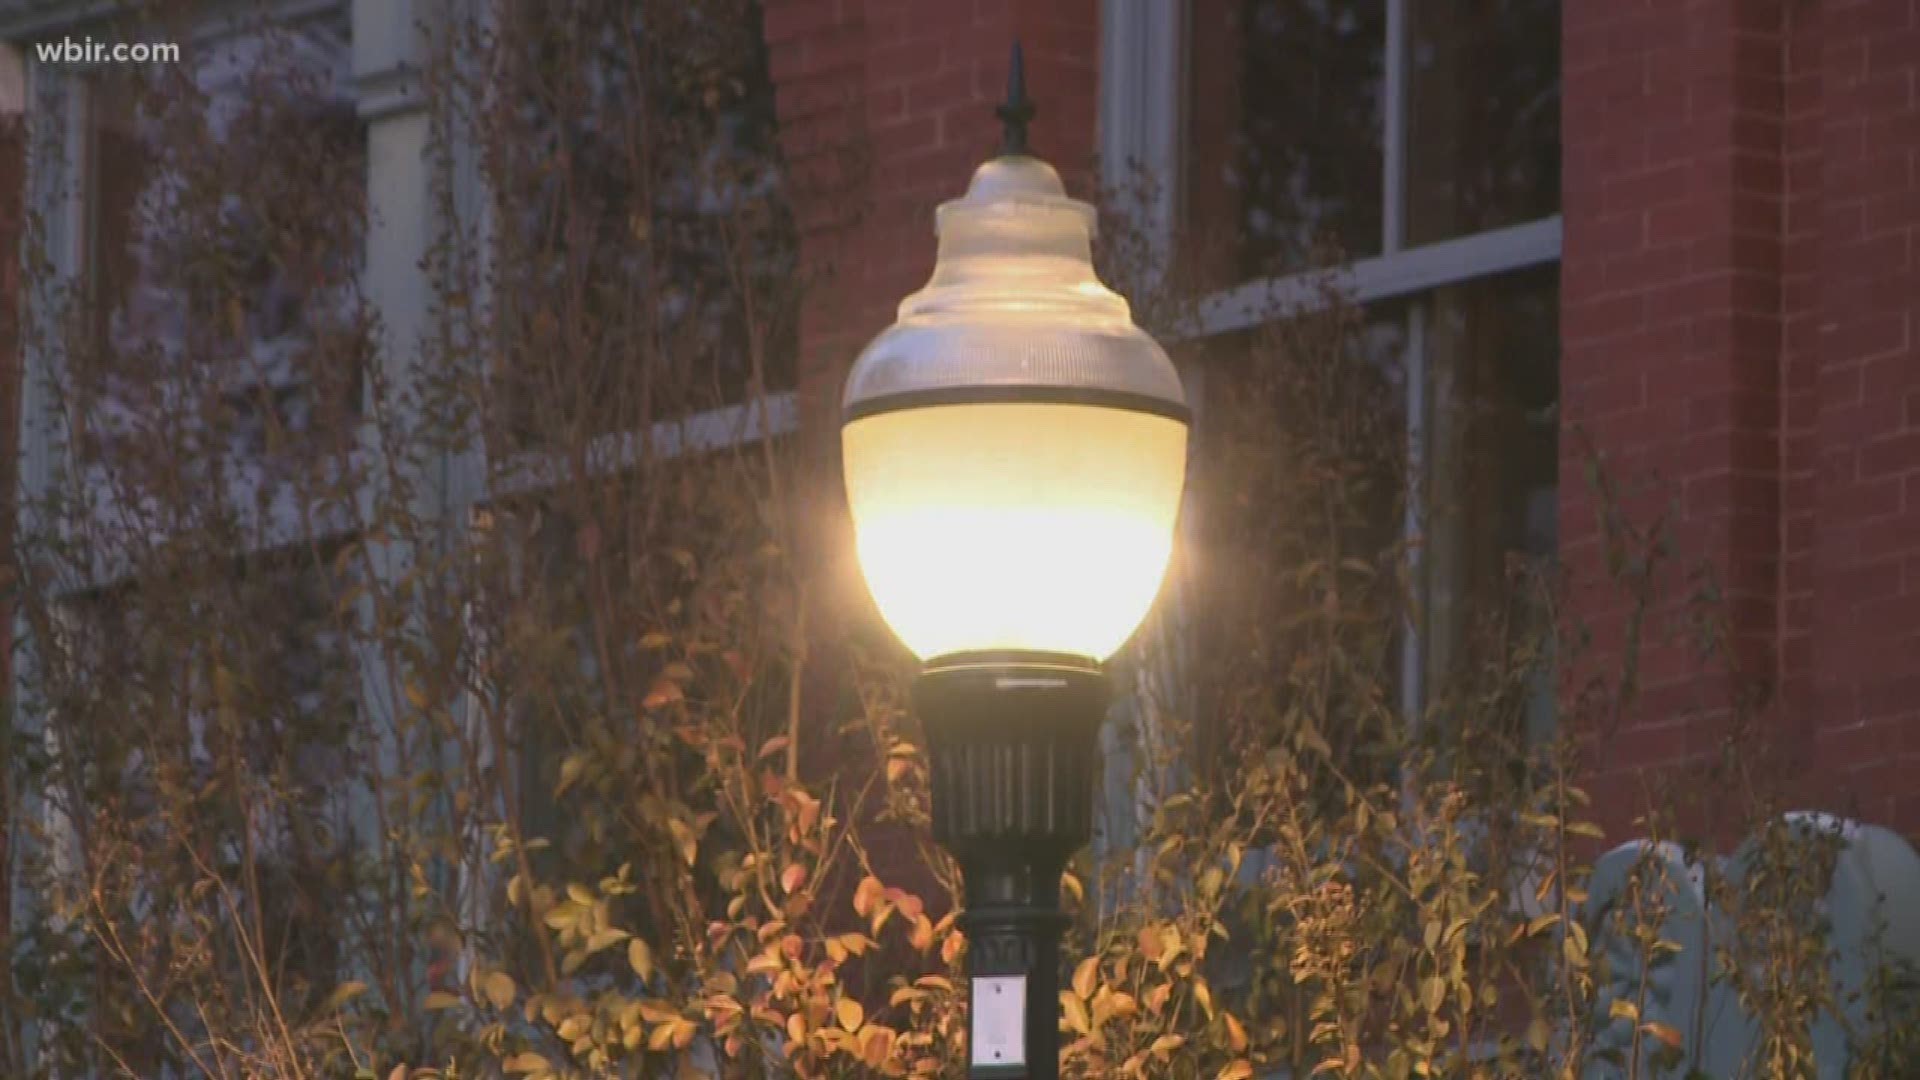 Knoxville leaders celebrated the finish of the streetlight project across the city after more than a year of work.